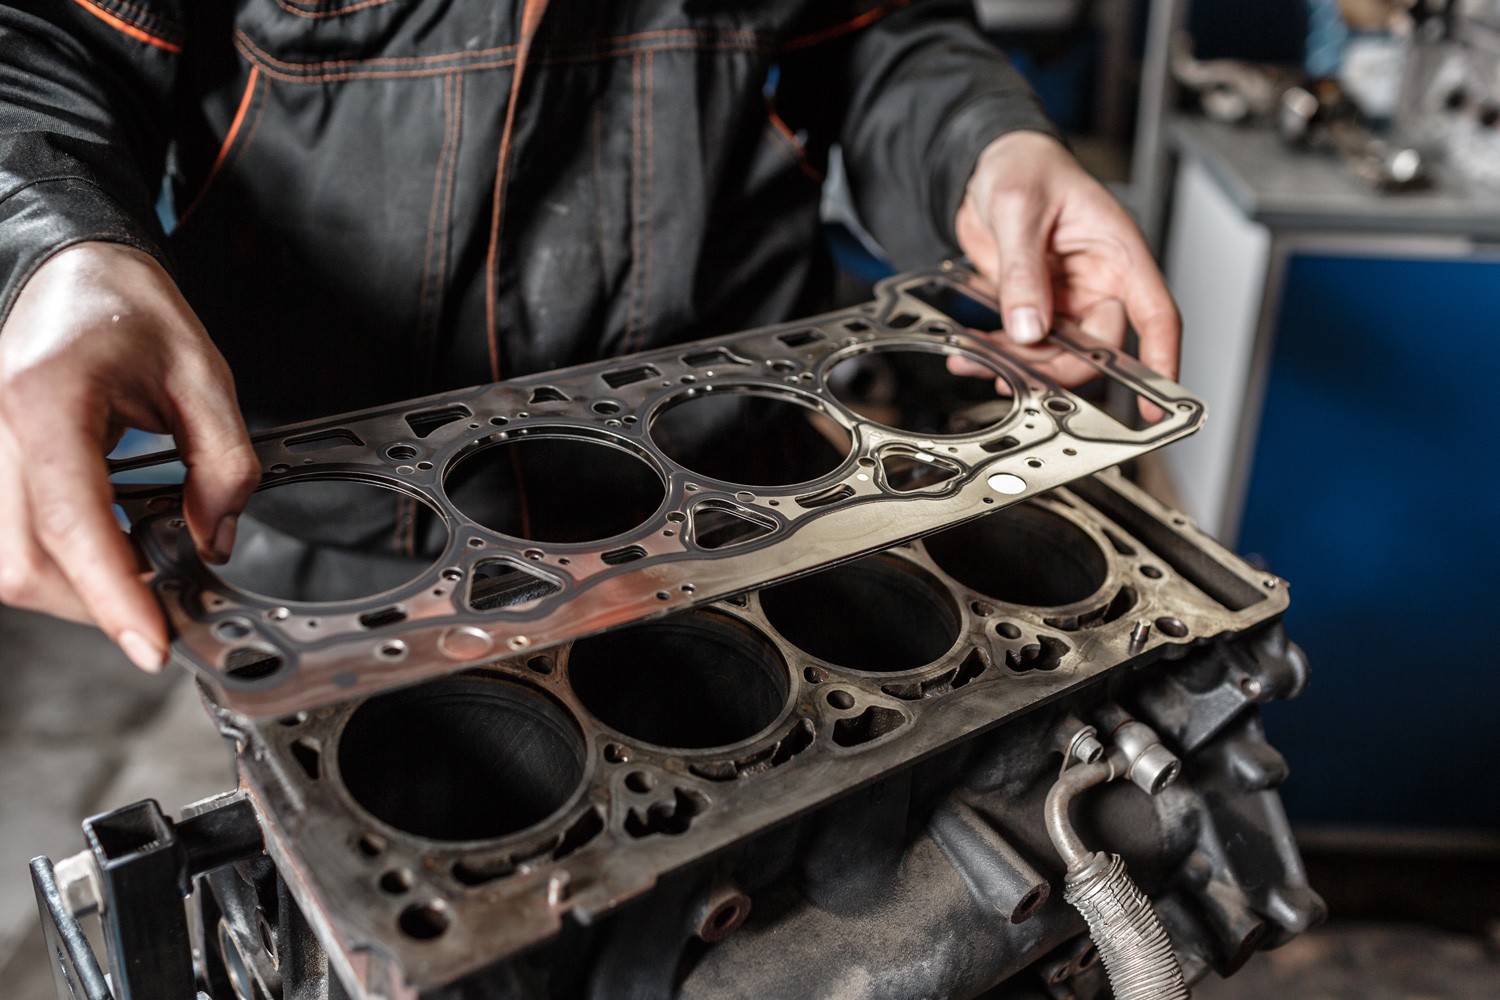 Sealing gasket in hand. The mechanic disassemble block engine vehicle. Engine on a repair stand with piston and connecting rod of automotive technology. Interior of a car repair shop.